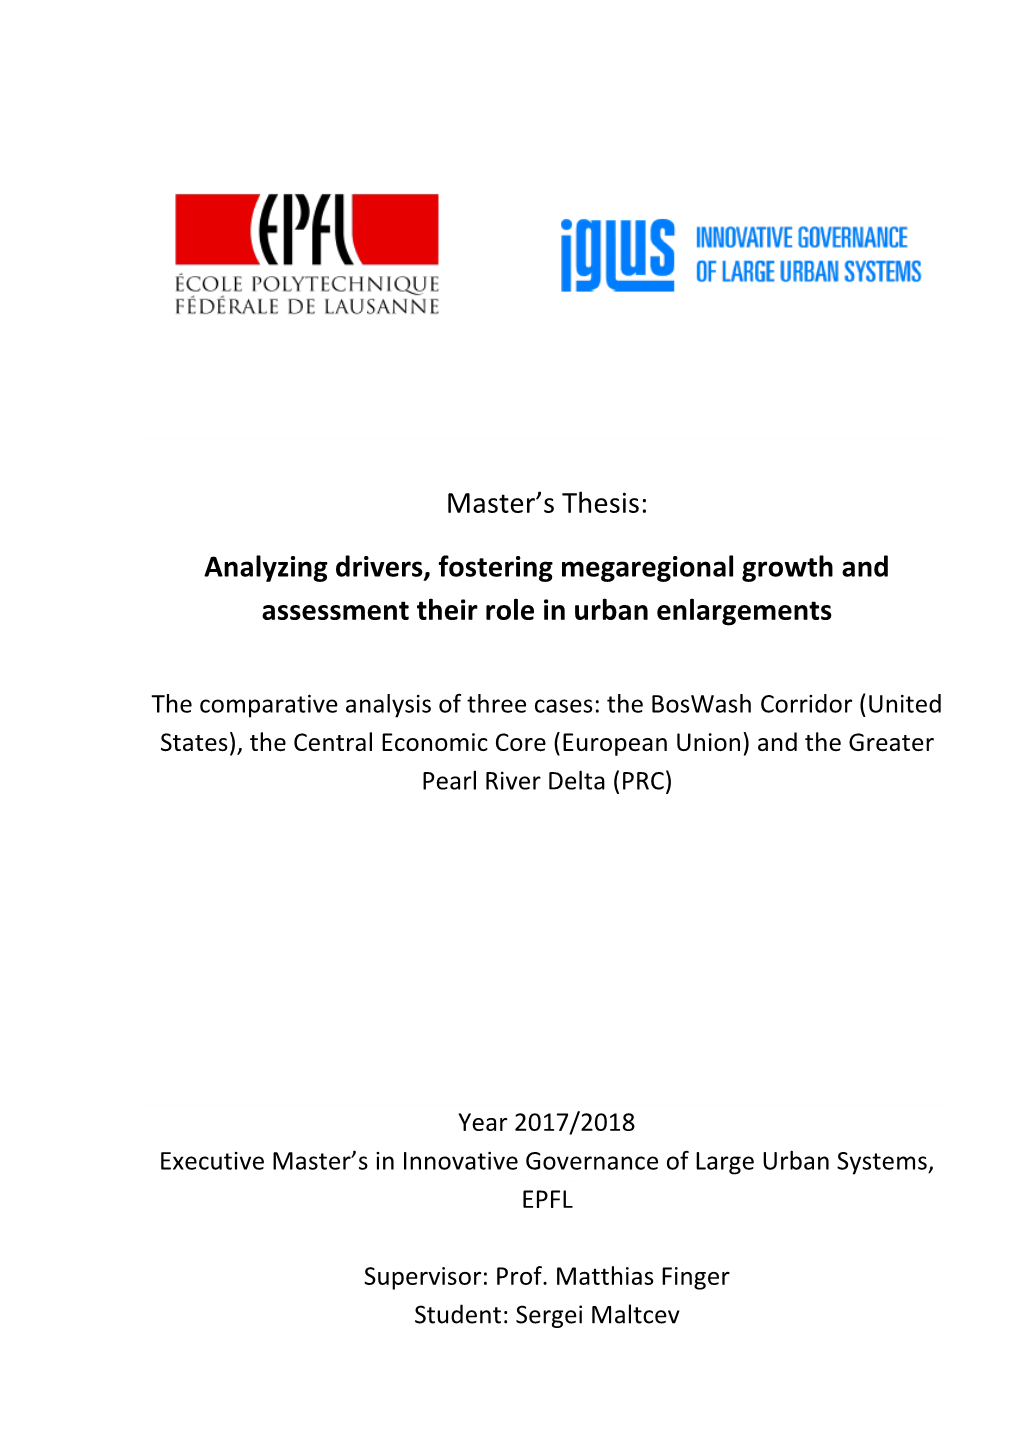 Analyzing Drivers, Fostering Megaregional Growth and Assessment Their Role in Urban Enlargements